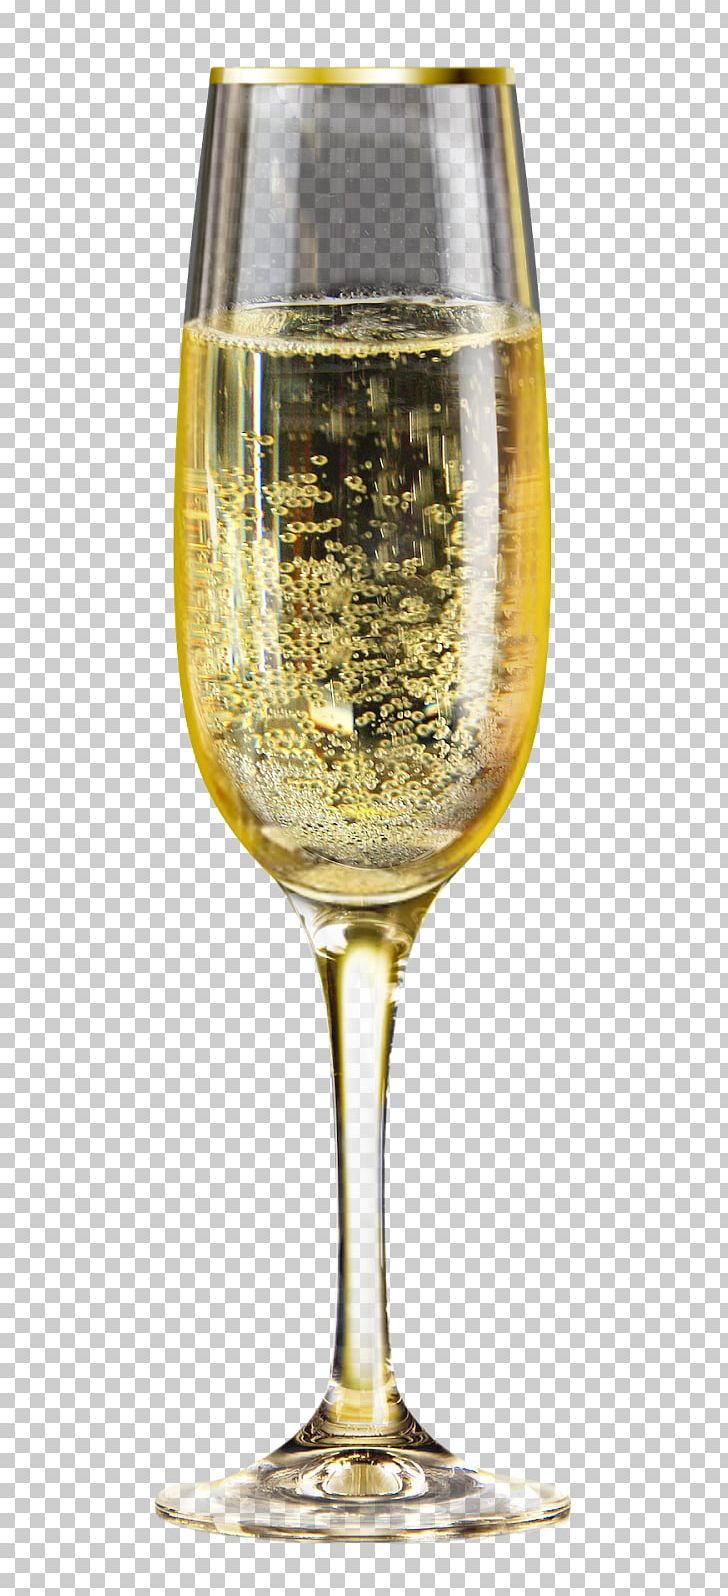 Champagne Glass Sparkling Wine Champagne Cocktail PNG, Clipart, Beer Glass, Brunch, Champagne, Champagne Breakfast, Champagne Cocktail Free PNG Download